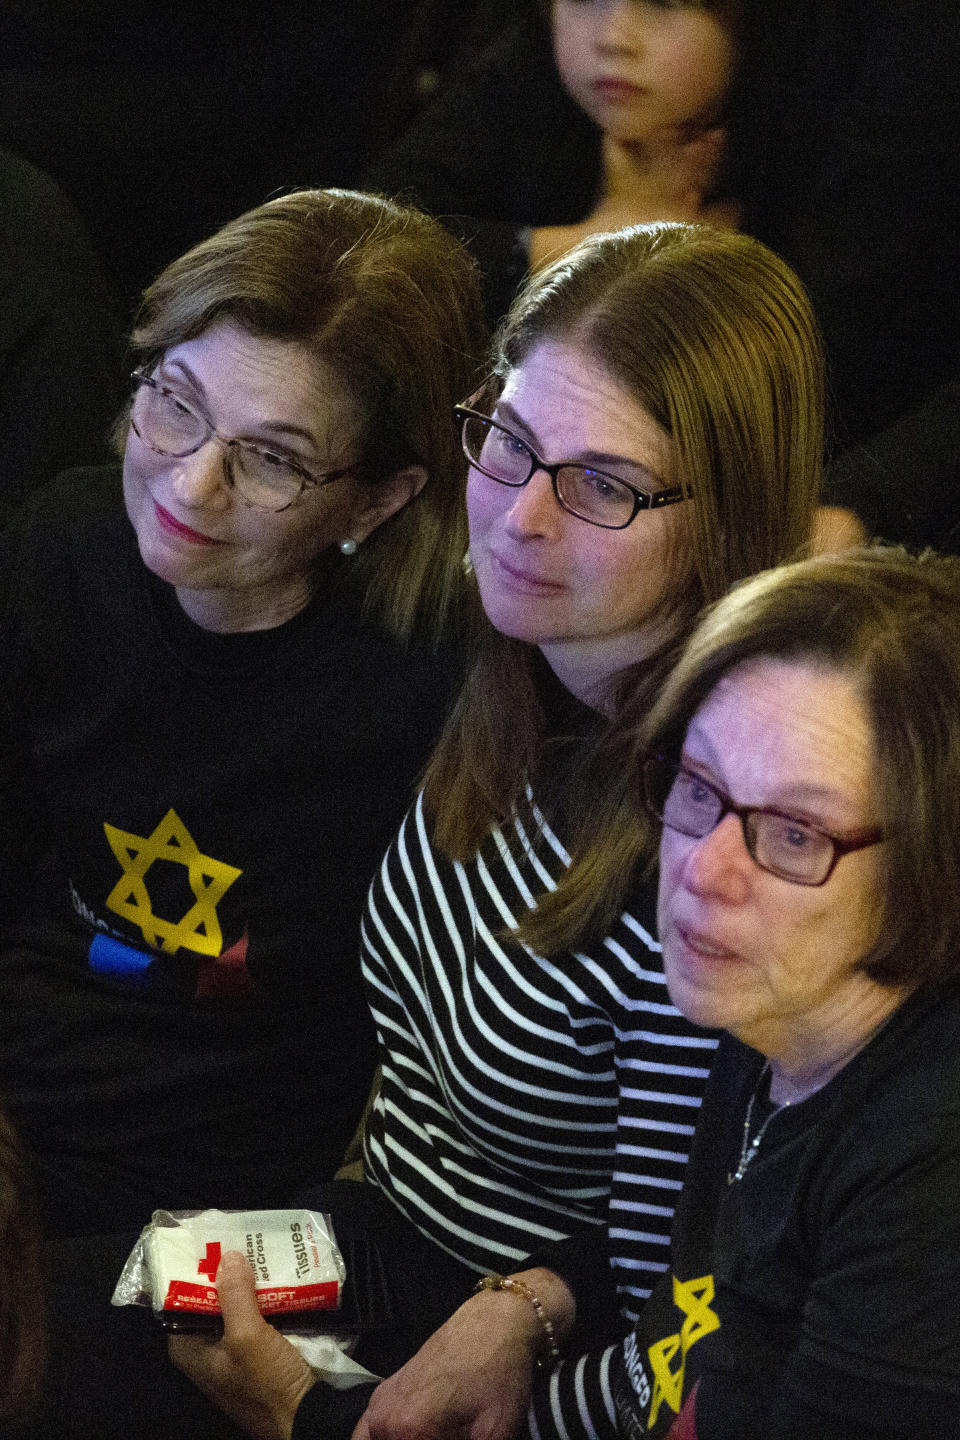 Family members of victim Daniel Stein, including his daughter Leigh Stein, center, and his wife Sharyn Stein, right, embrace during the one-year commemoration of the Tree of Life synagogue attack at Soldiers & Sailors Memorial Hall and Museum, Sunday, Oct. 27, 2019, in Pittsburgh. (AP Photo/Rebecca Droke)